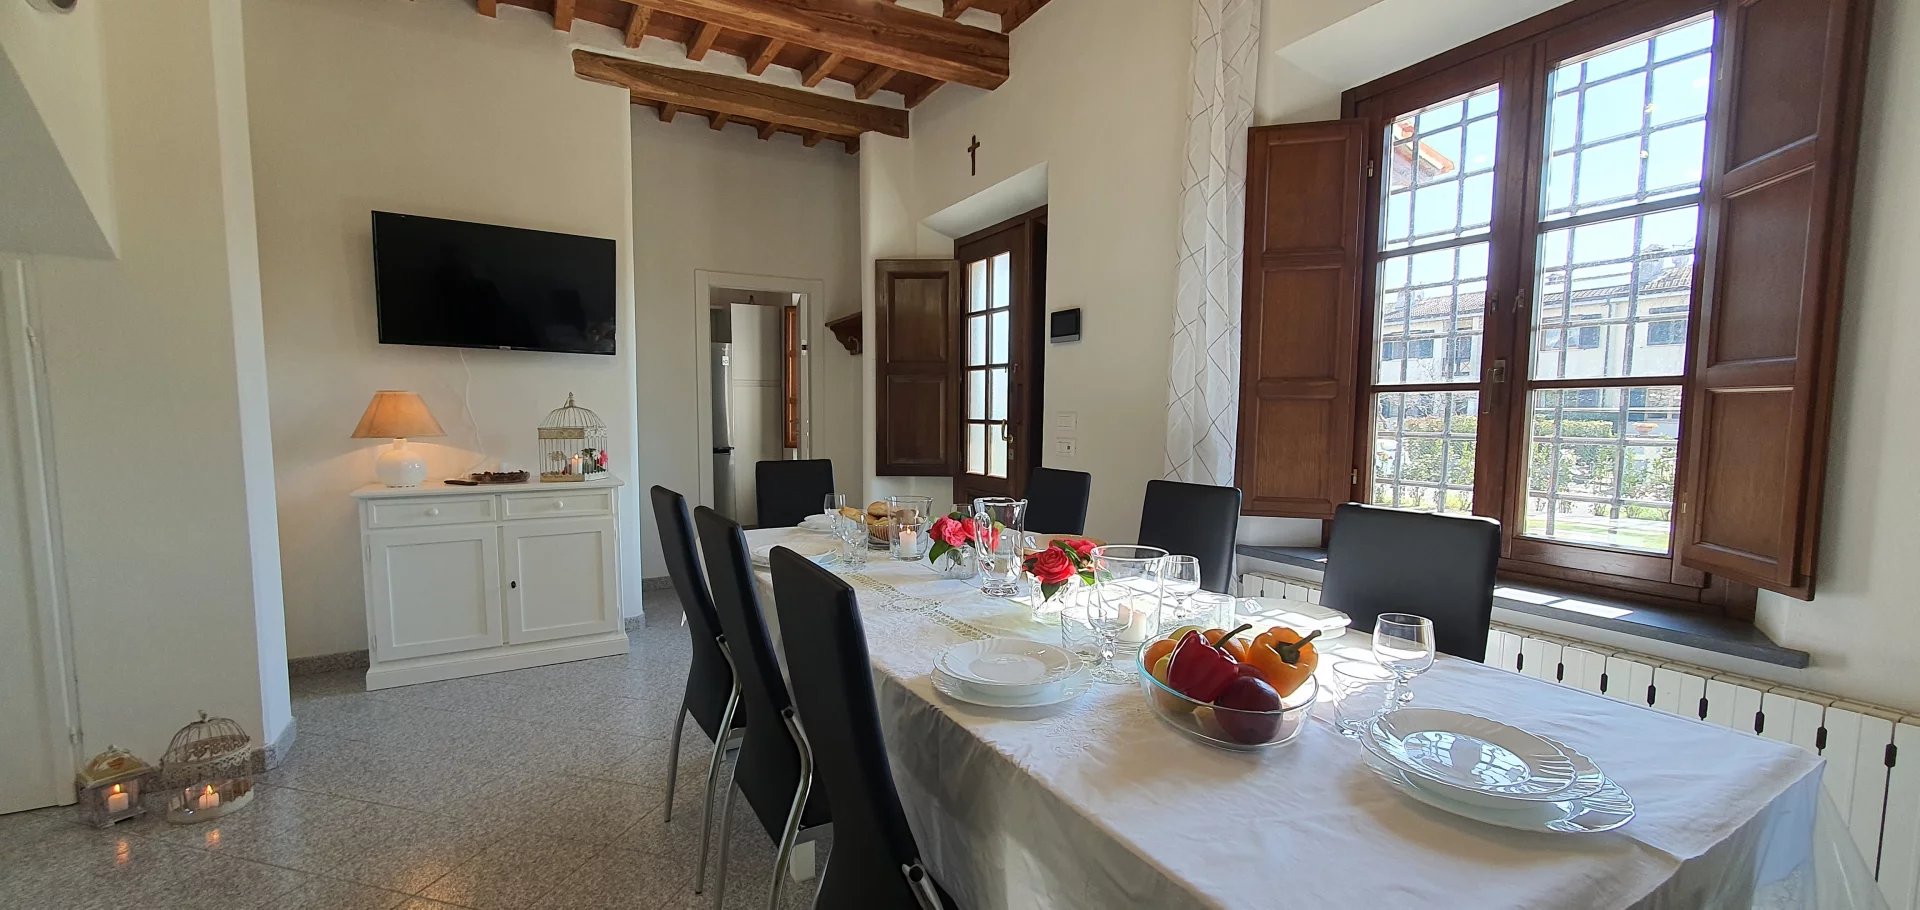 ITALY, TUSCANY, LUCCA, BEAUTIFUL FARMHOUSE WITH POOL, FOR 8 PERSONS, FROM € 1.380 PER WEEK